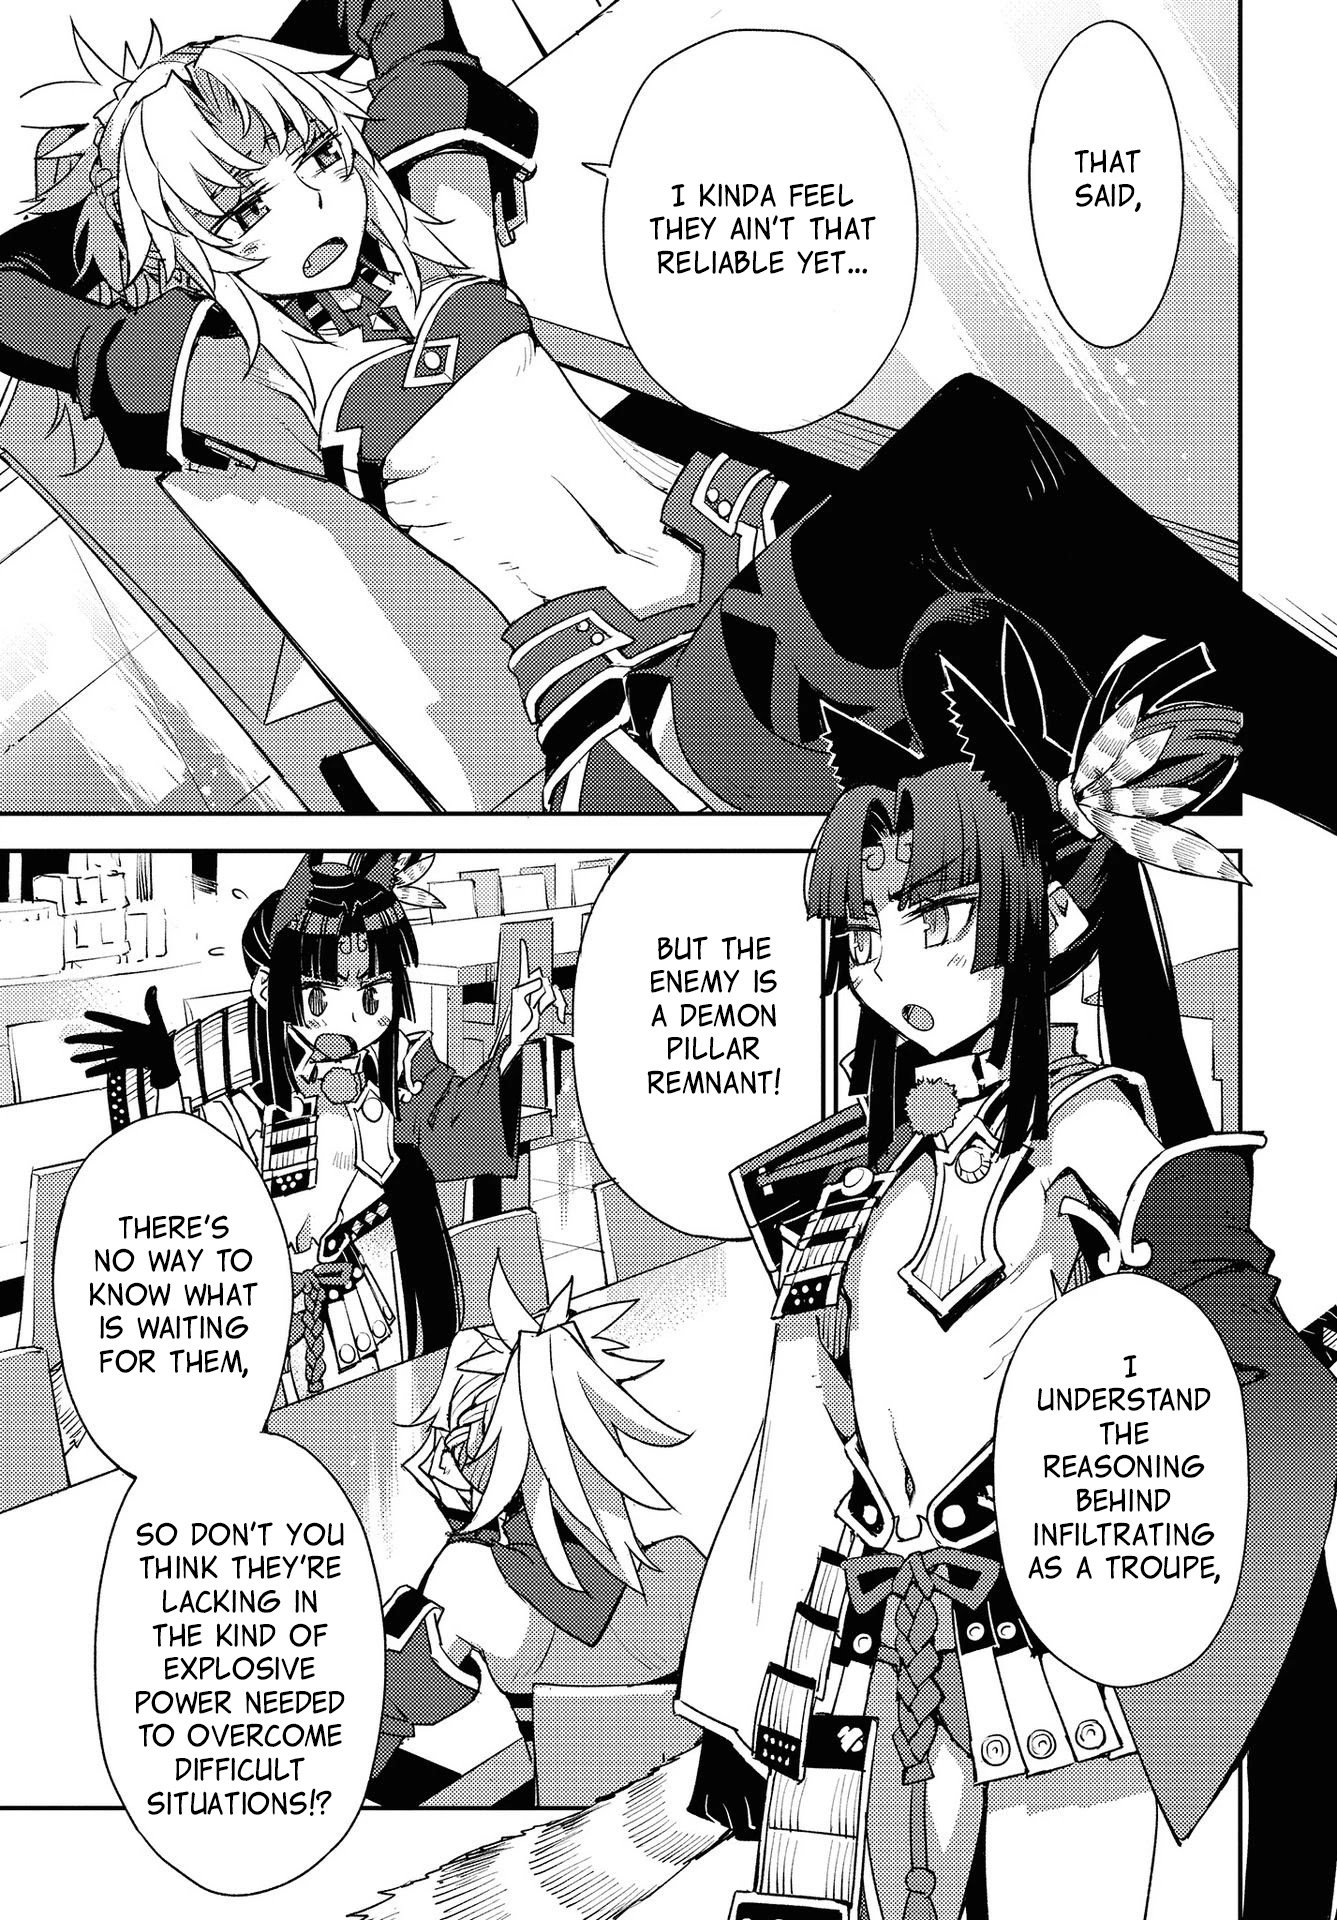 Fate/grand Order: Epic Of Remnant - Subspecies Singularity Iv: Taboo Advent Salem: Salem Of Heresy Chapter 17: The First Knot - 7 - Picture 3